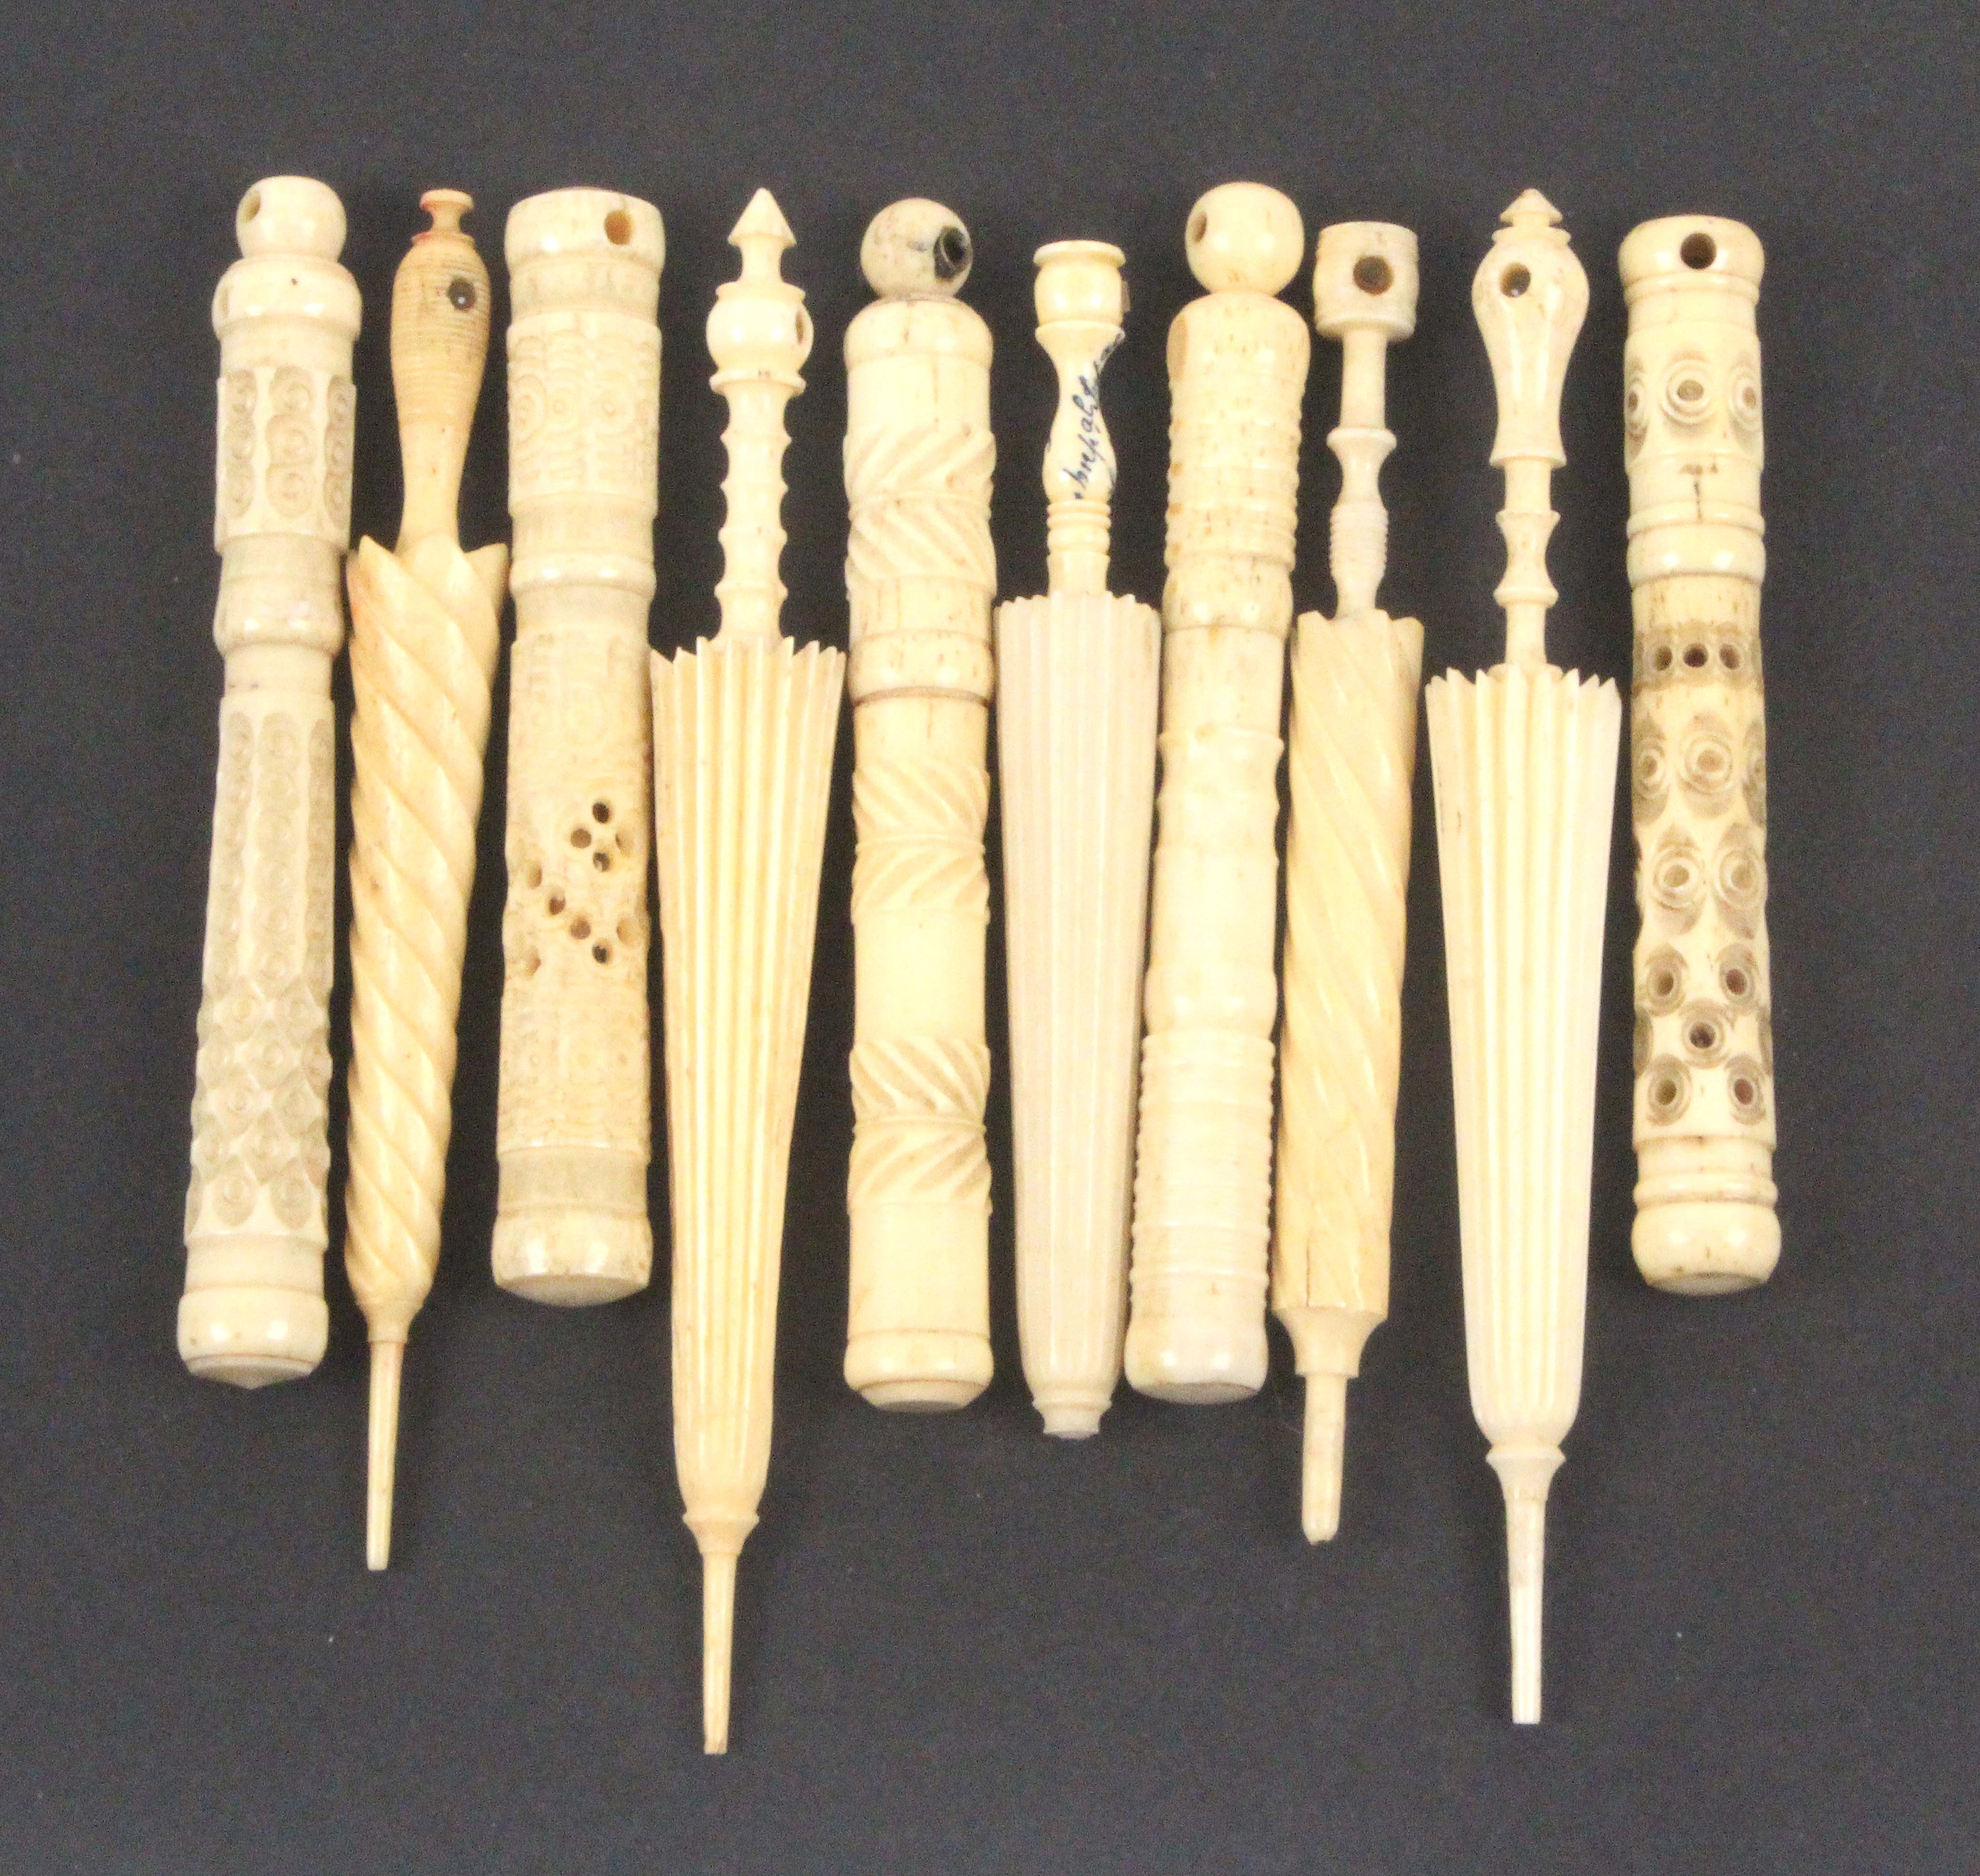 Stanhopes - ten - sewing, comprising five bone cylinder needle cases and five furled umbrella